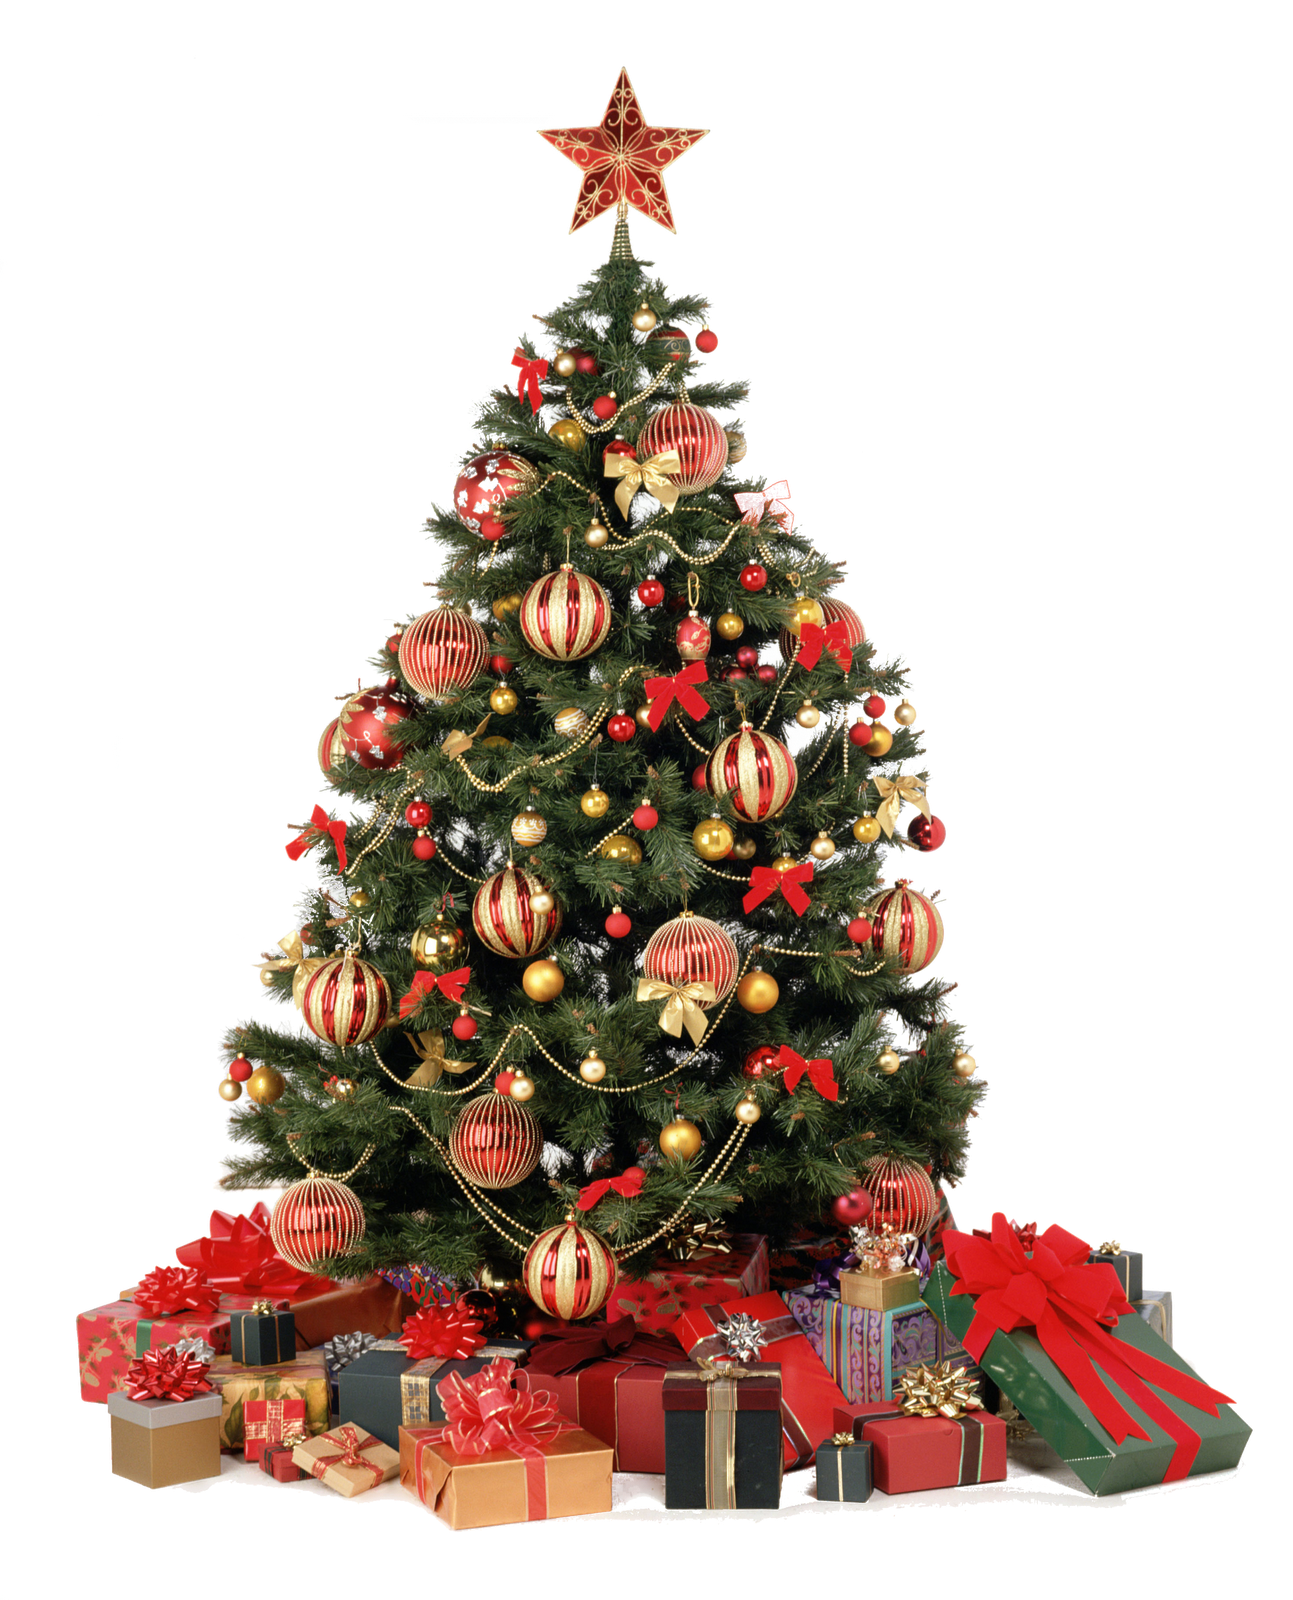 sketchup-texture-christmas-stuff-in-png-format